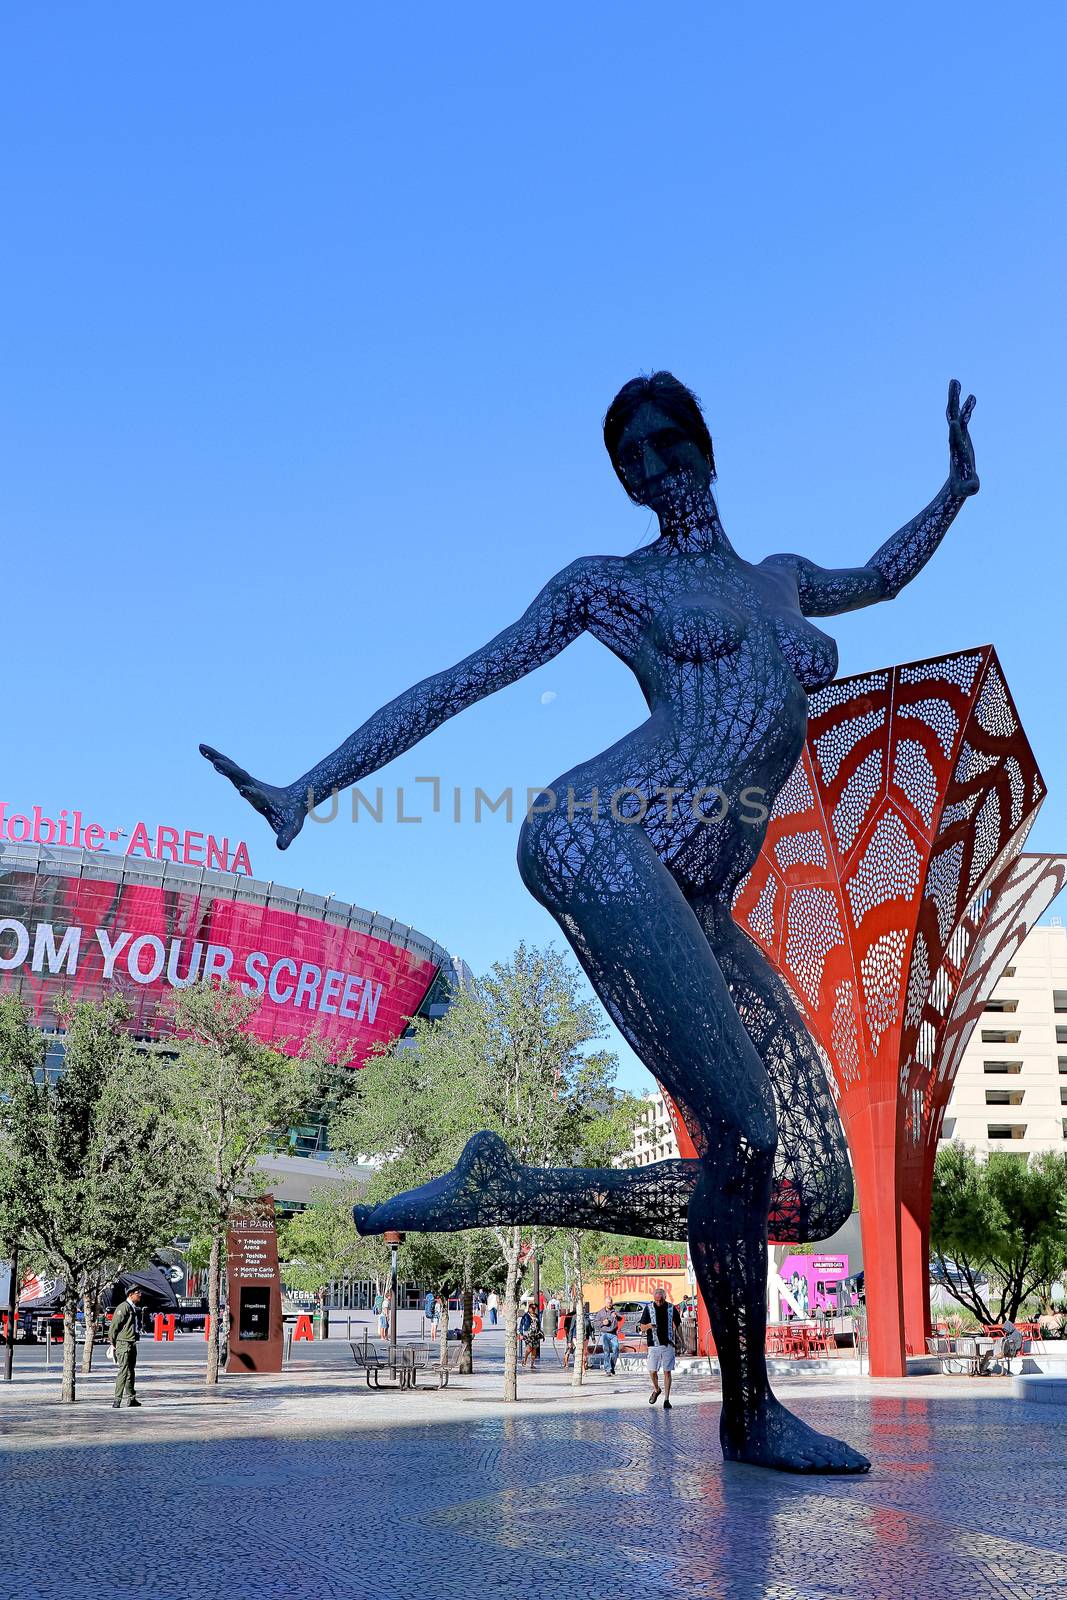 LAS VEGAS,NV/USA - Sep 15,2018 : Entrance of the Park at the T-Mobile Arena in Las Vegas.